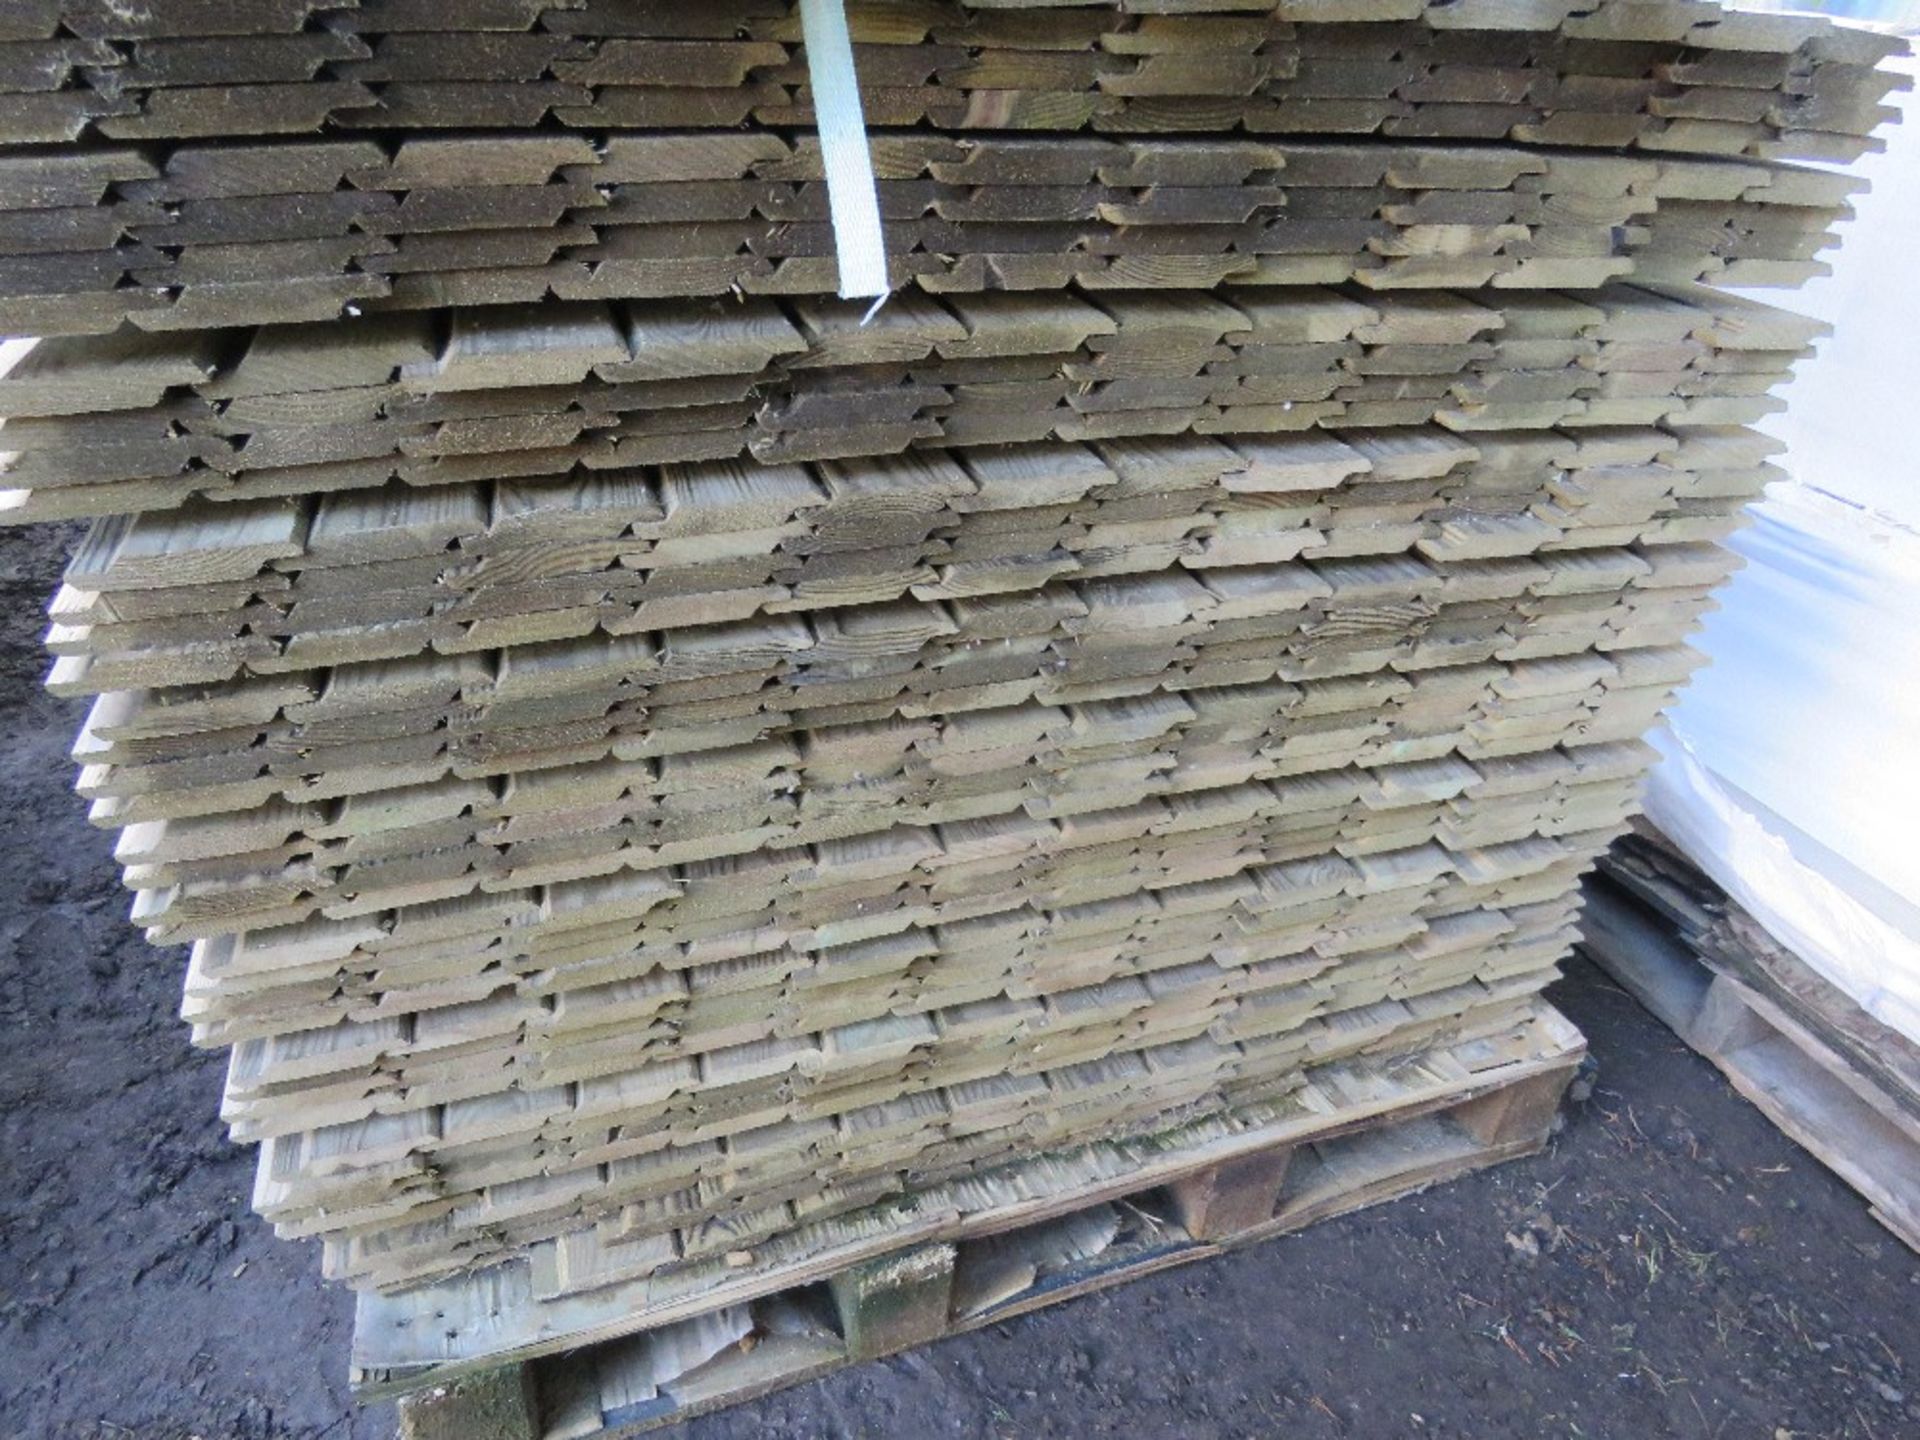 2 X PALLETS OF SHIPLAP PRESSURE TREATED FENCE CLADDING TIMBER BOARDS. 1.02M LENGTH X 95MM WIDTH APP - Image 3 of 4